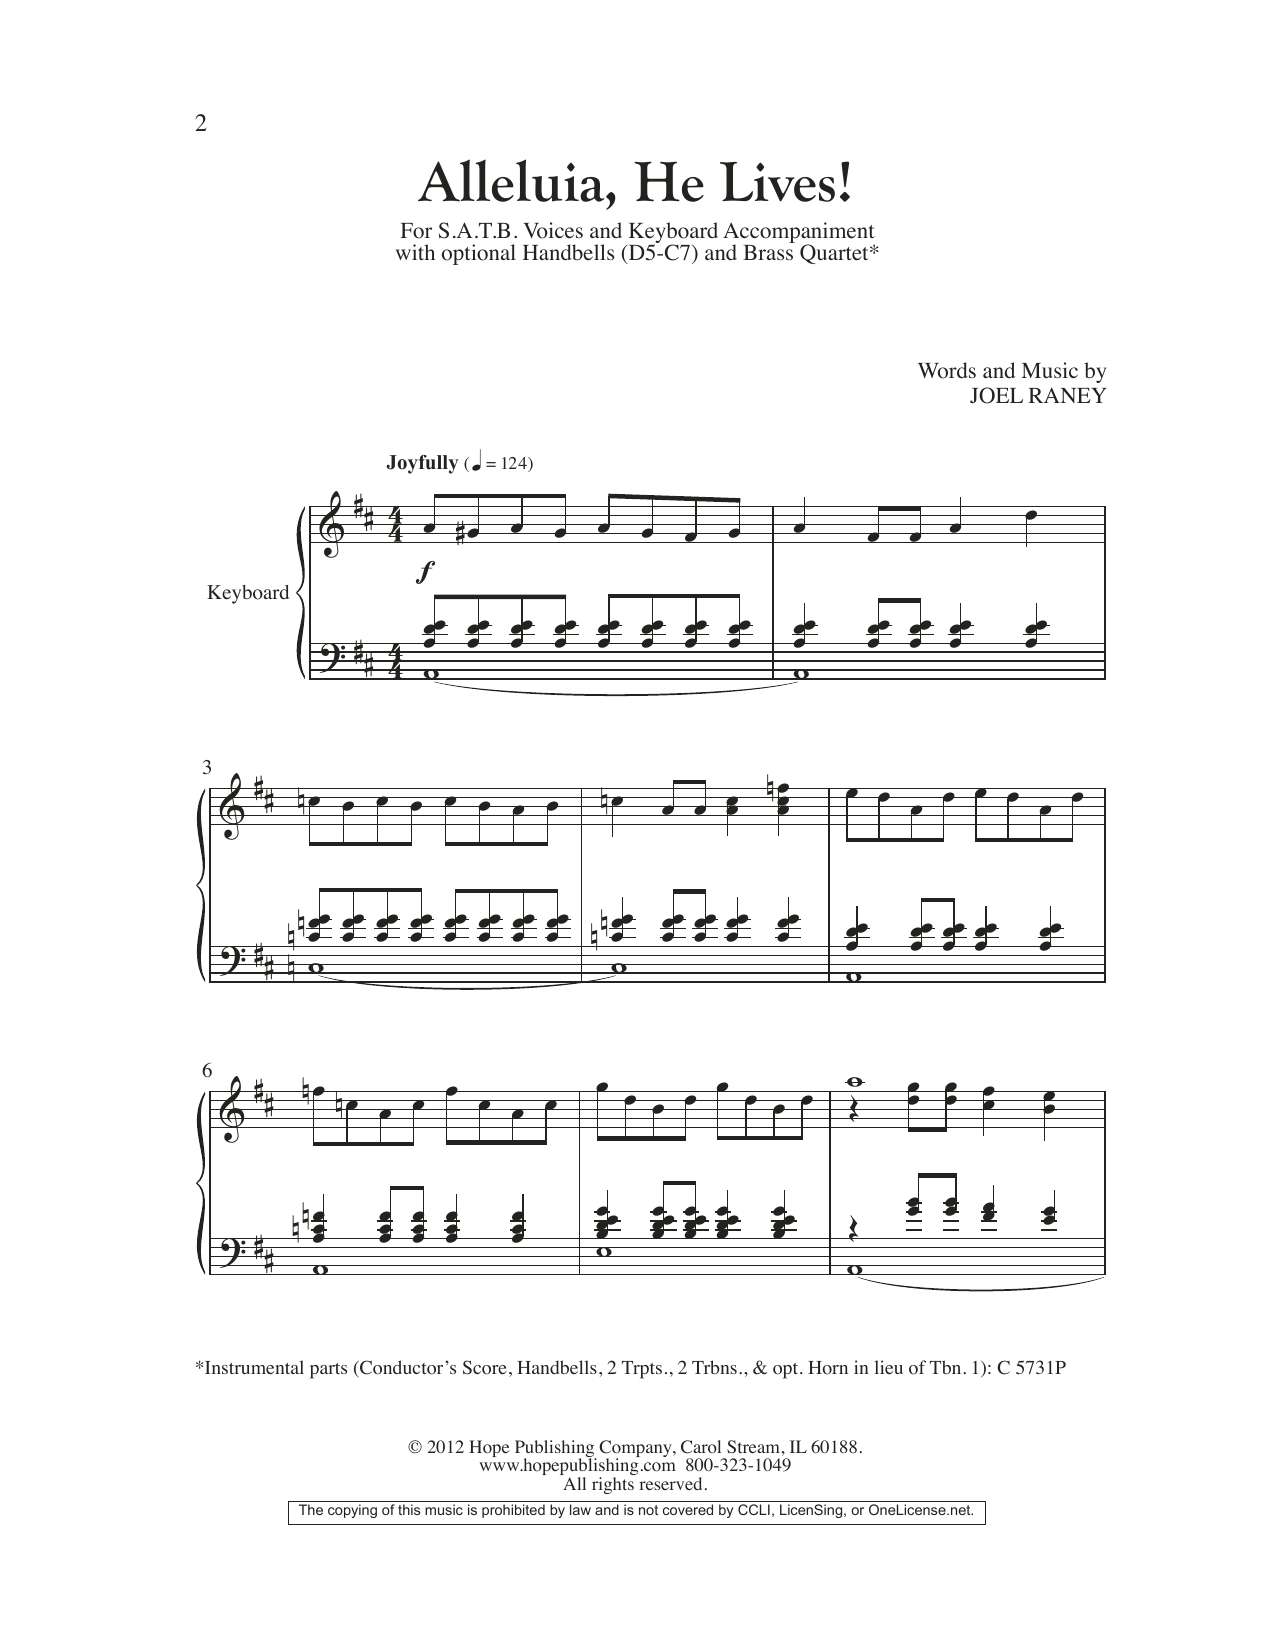 Joel Raney Alleluia, He Lives sheet music preview music notes and score for Choir including 11 page(s)